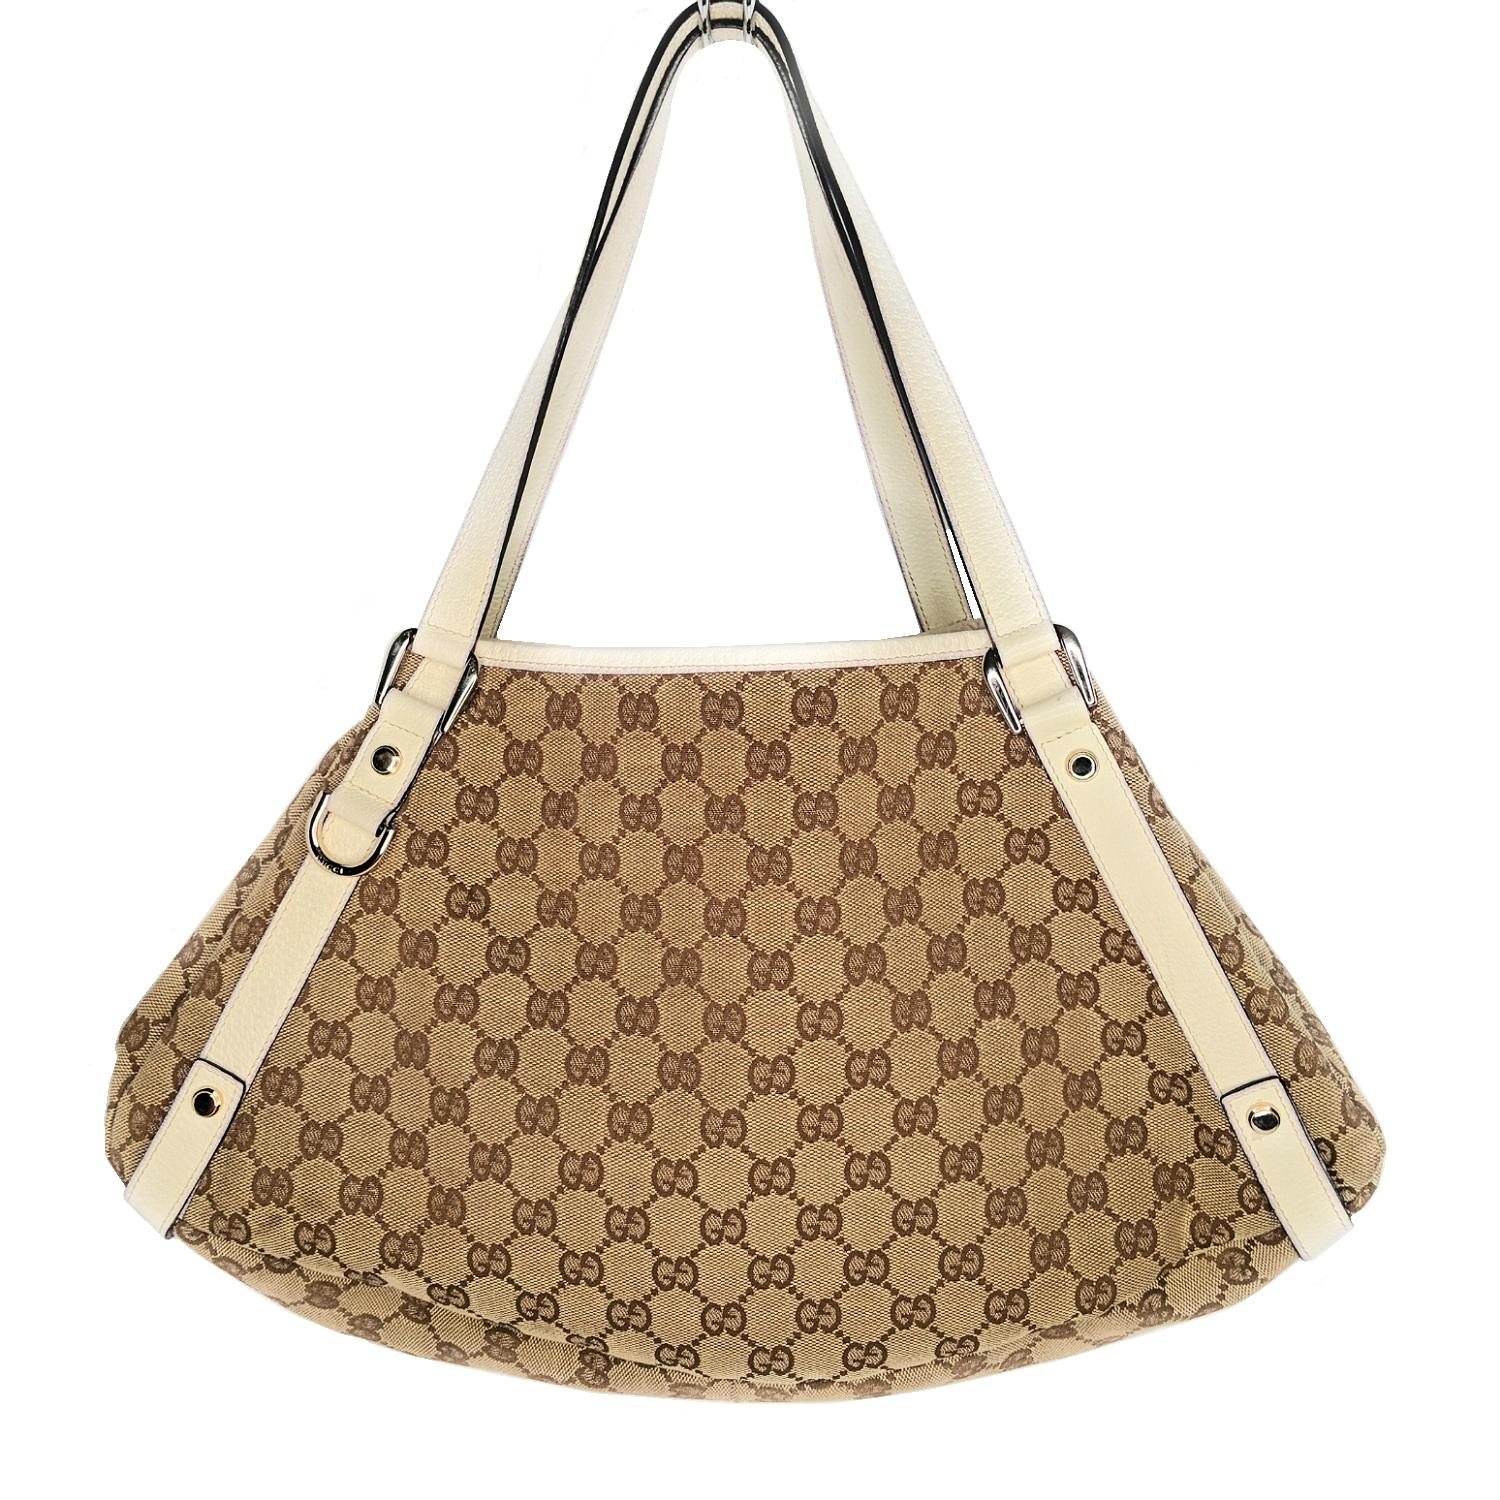 This chic hobo is crafted of Gucci GG monogram canvas and features double looping leather shoulder straps with light gold hardware links. The top is open to a brown fabric interior with zipper and patch pockets.

Designer: Gucci
Material: